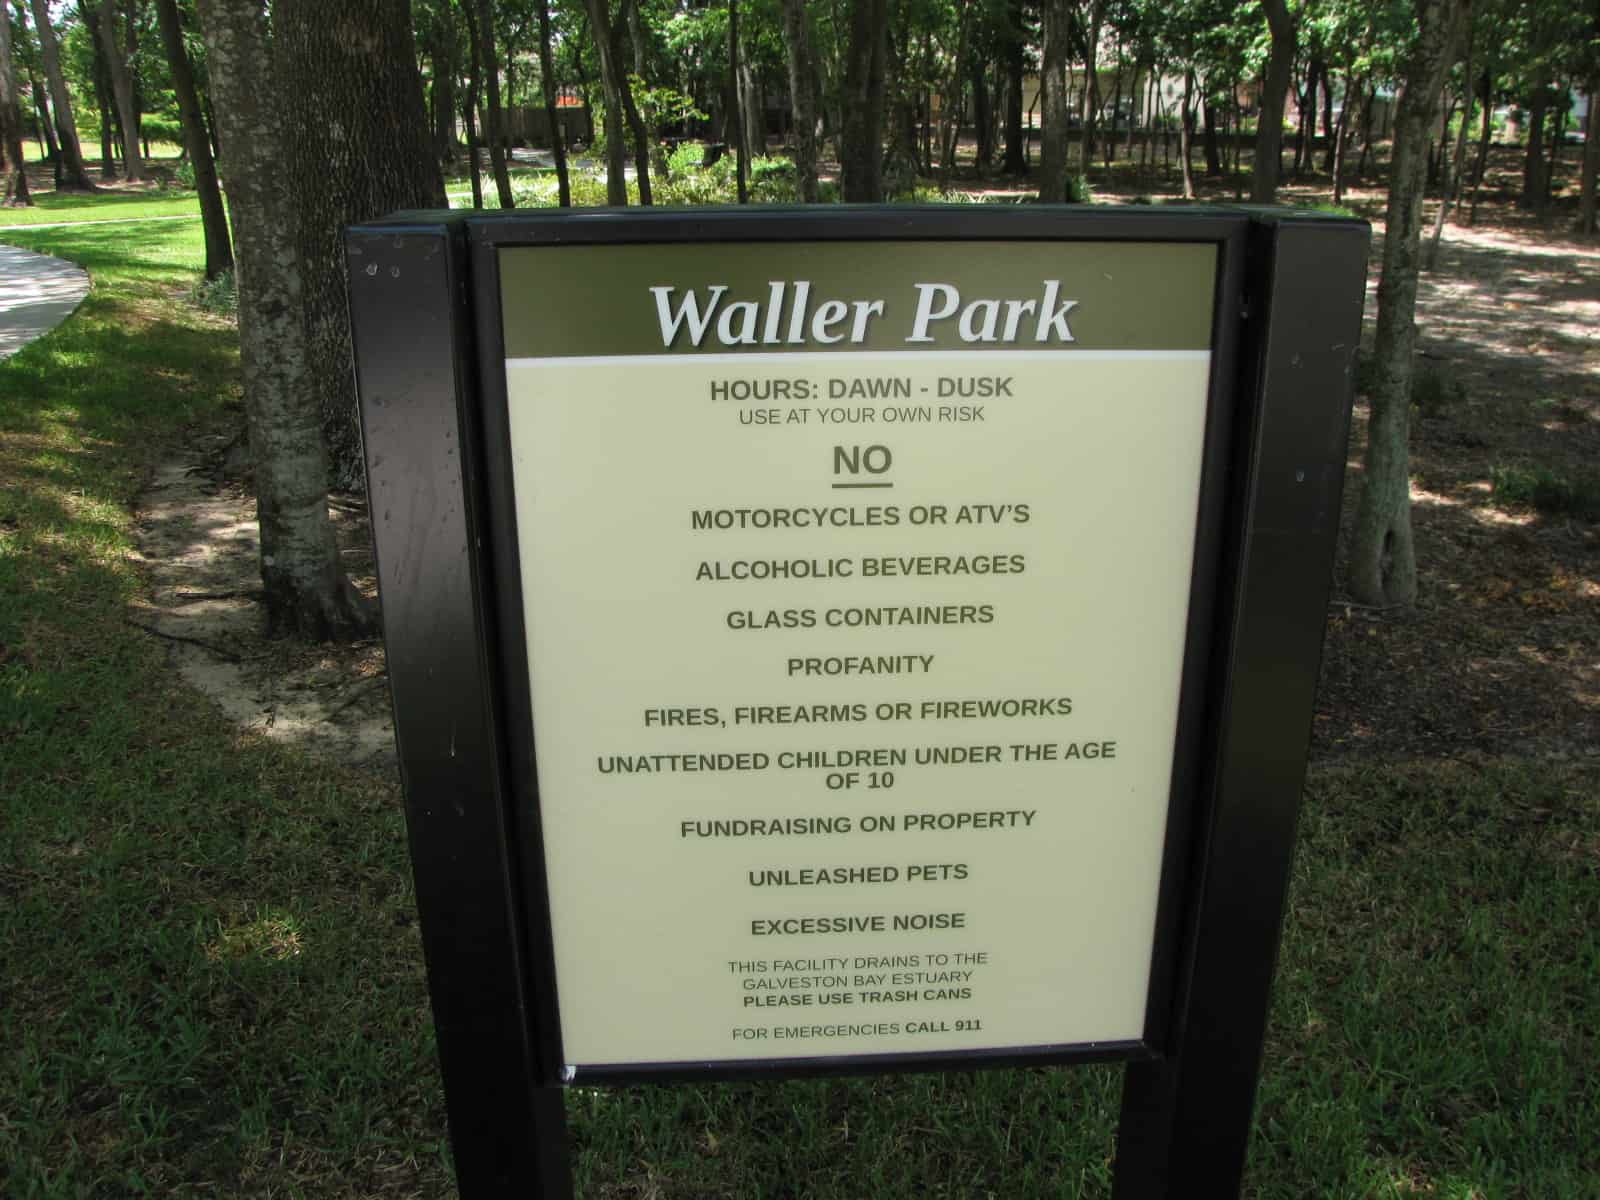 Rules of Waller Park